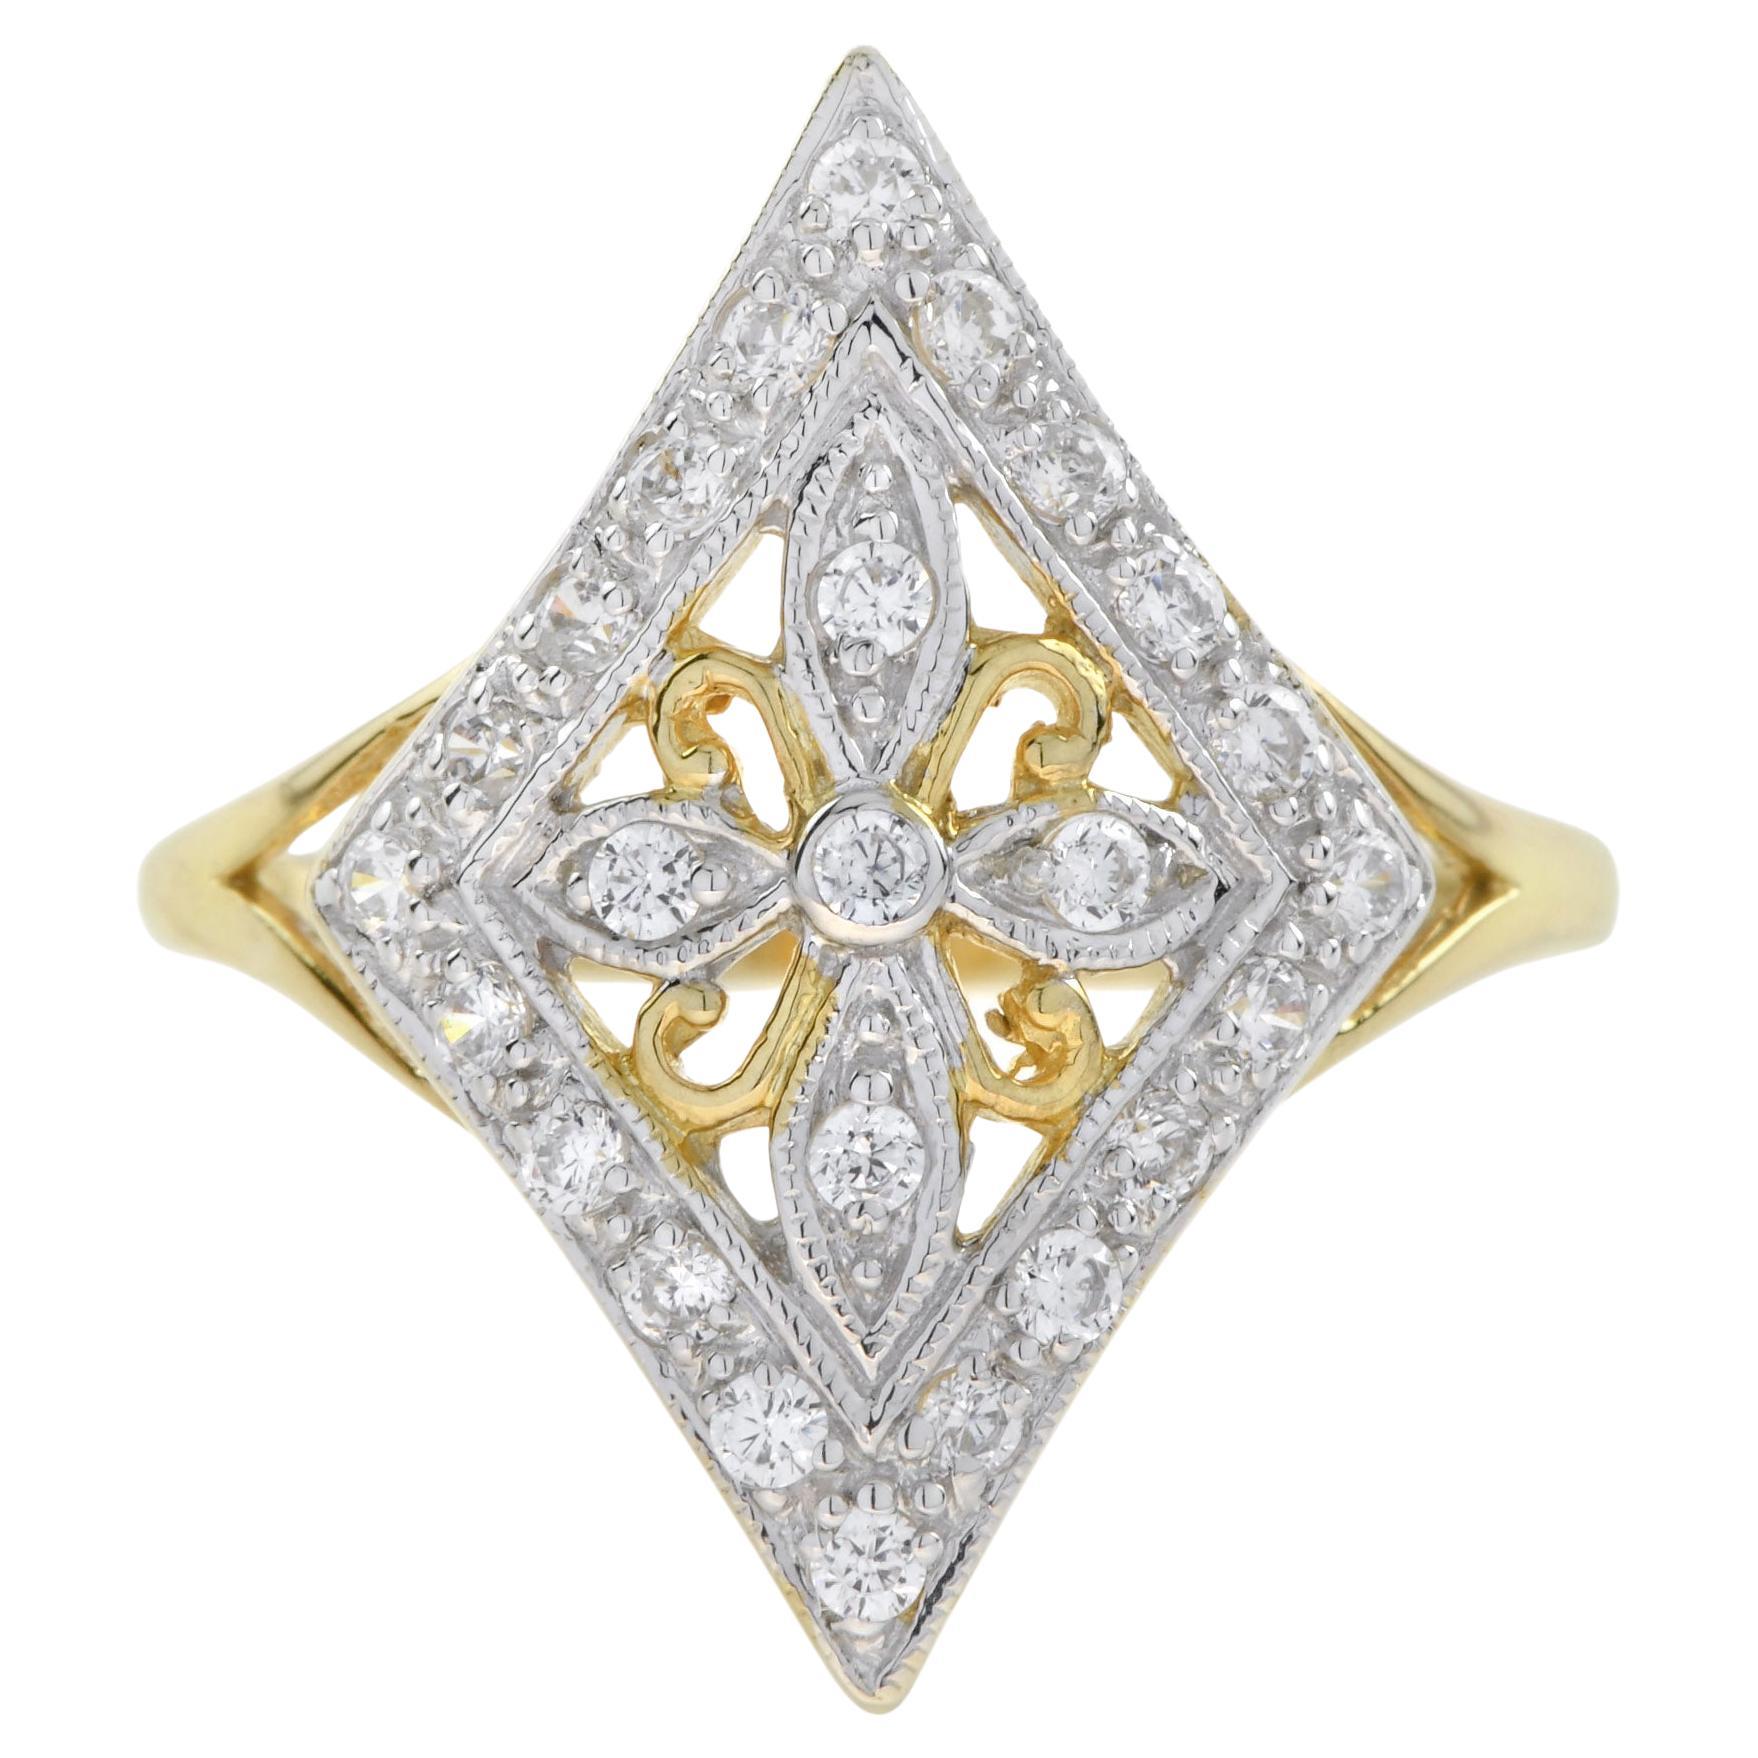 Vintage Style Diamond Floral Filigree Ring in 14K Yellow Gold